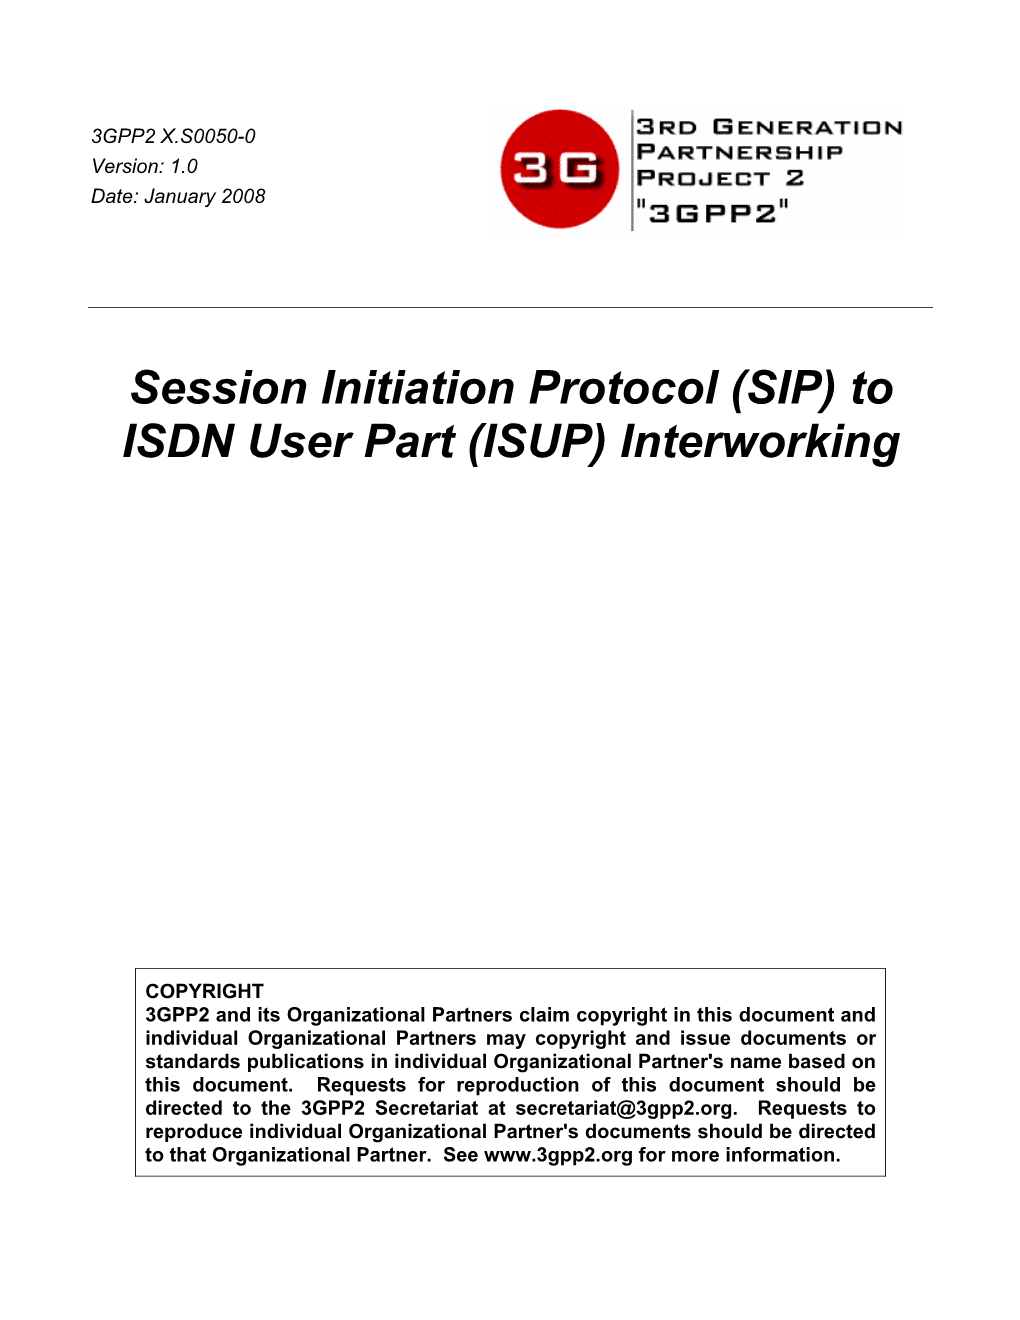 Session Initiation Protocol (SIP) to ISDN User Part (ISUP) Interworking